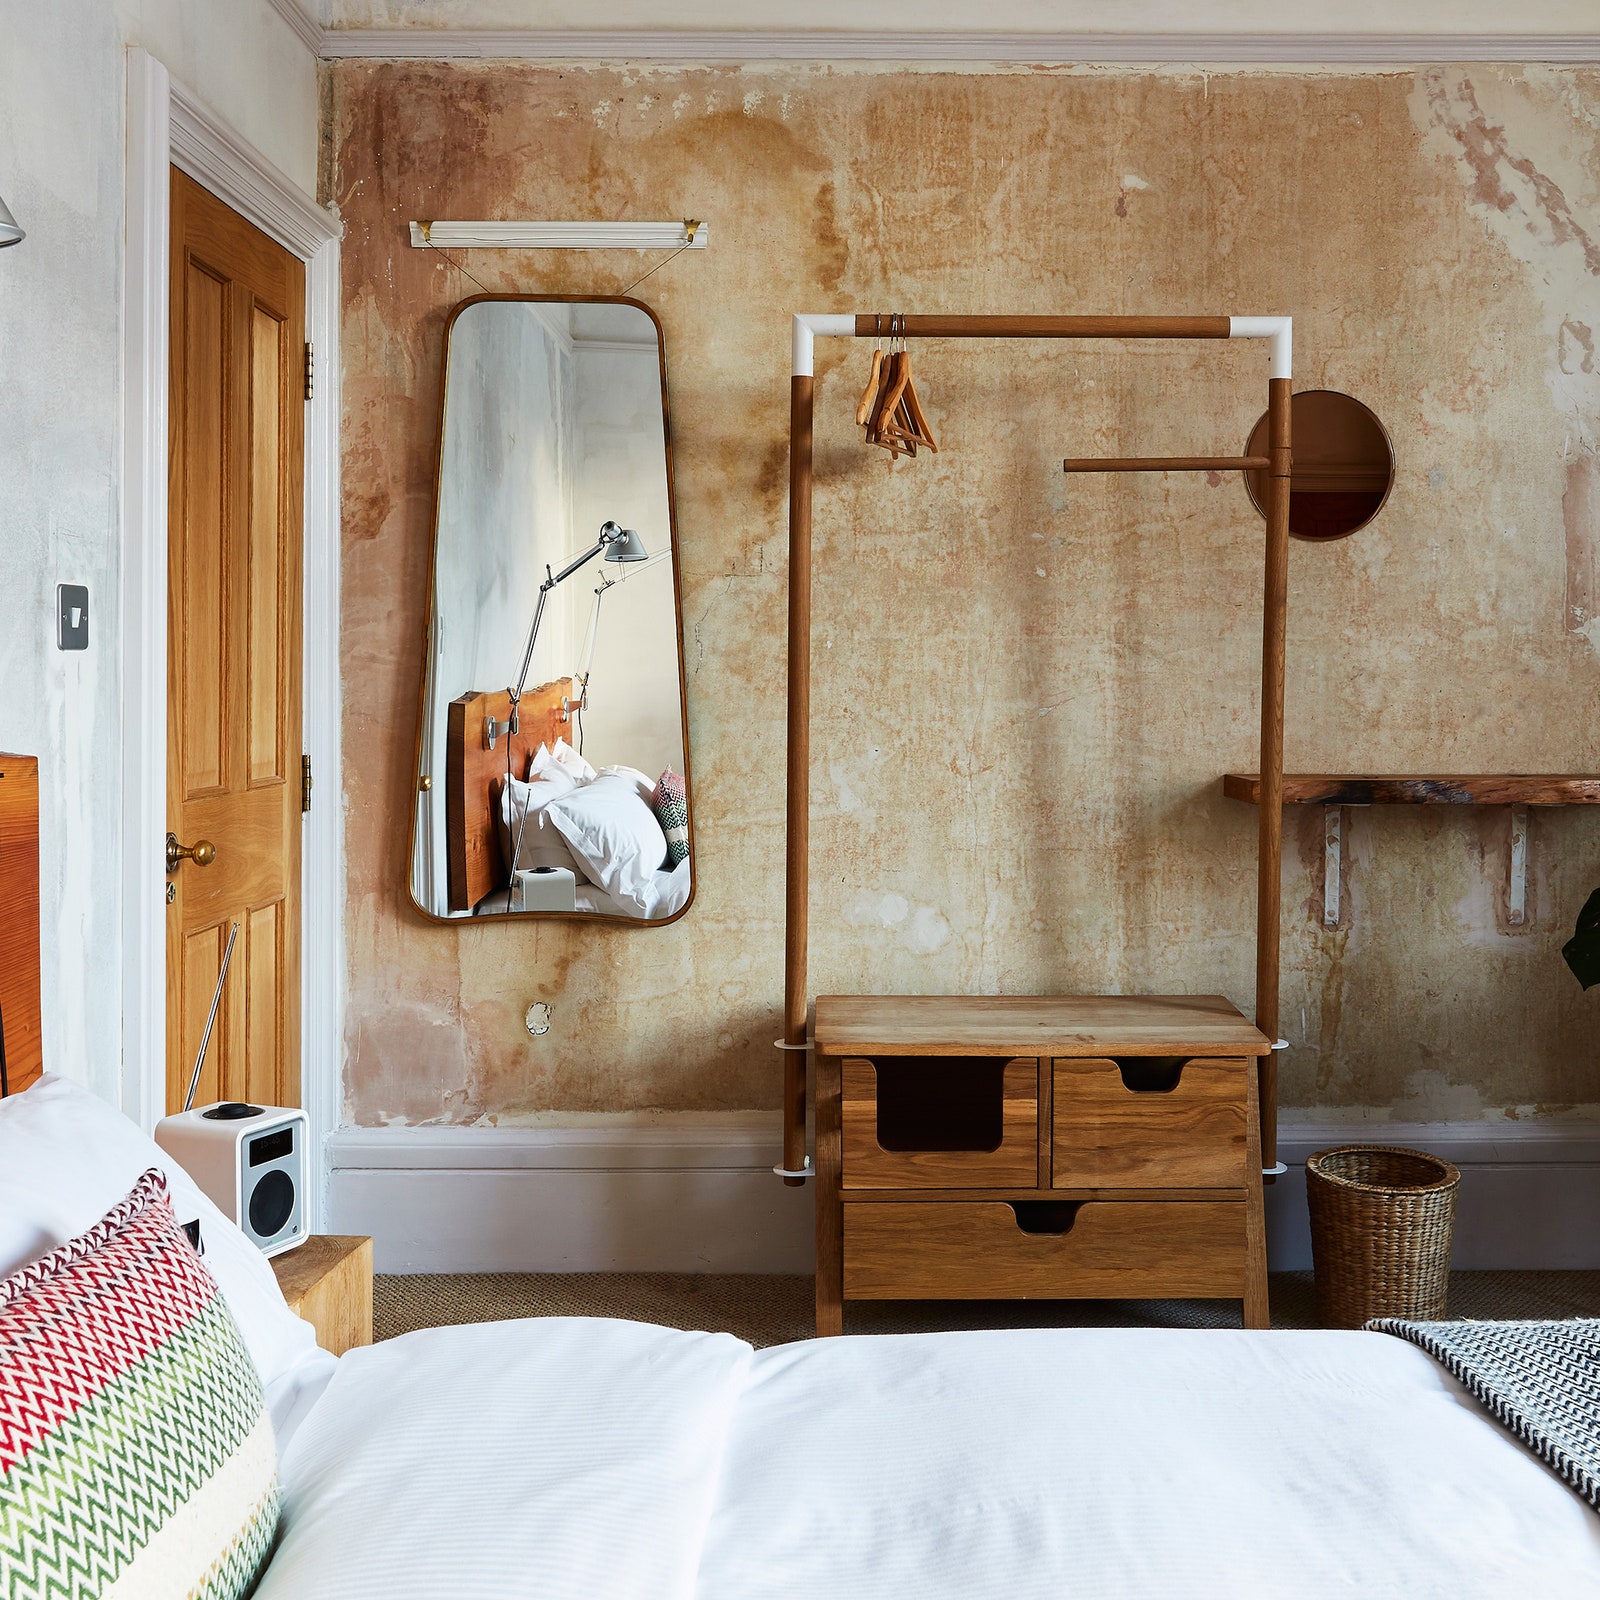 8 Editor-Recommended London Hotels for Under $250 a Night